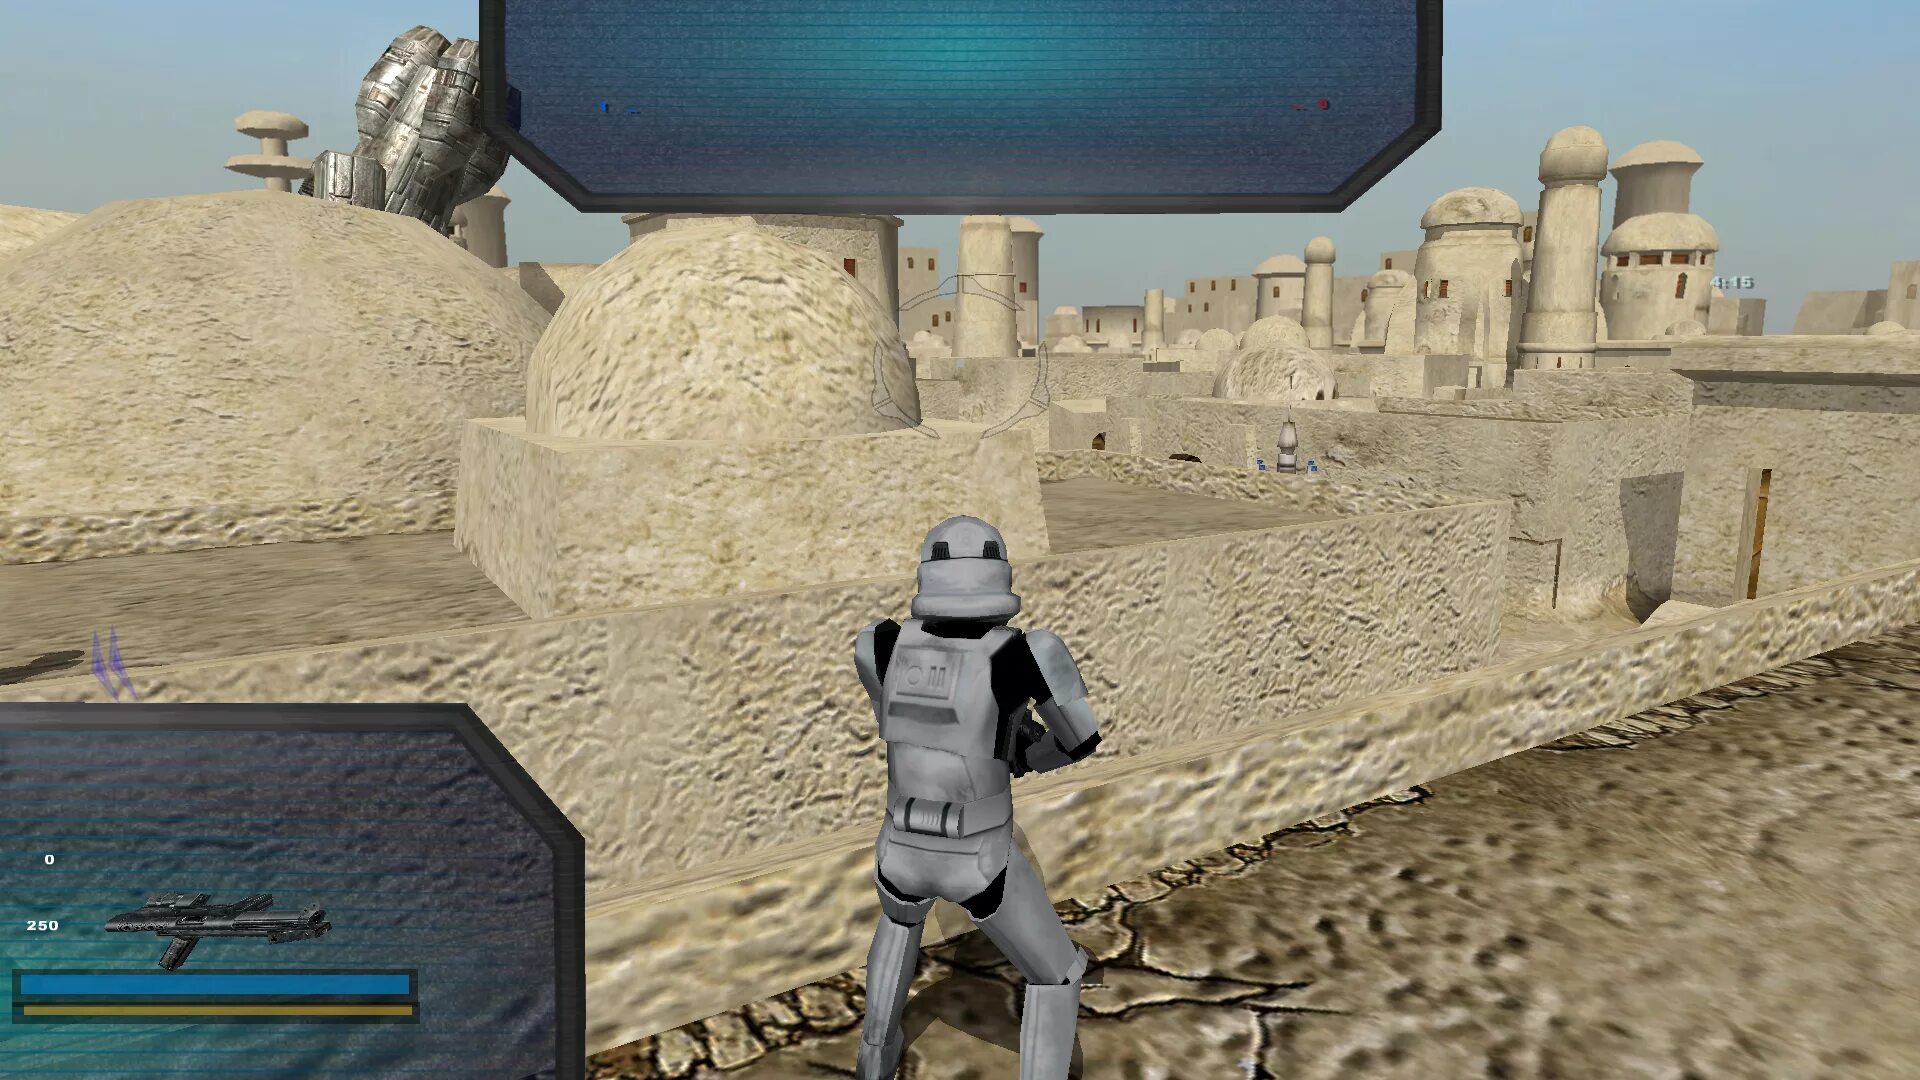 Star Wars Battlefront 2004. Стар ВАРС батлфронт 2007. Батлфронт 2 2007. Star Wars Battlefront 2 2005 Мос Эйсли. Star wars battlefront classic collection switch